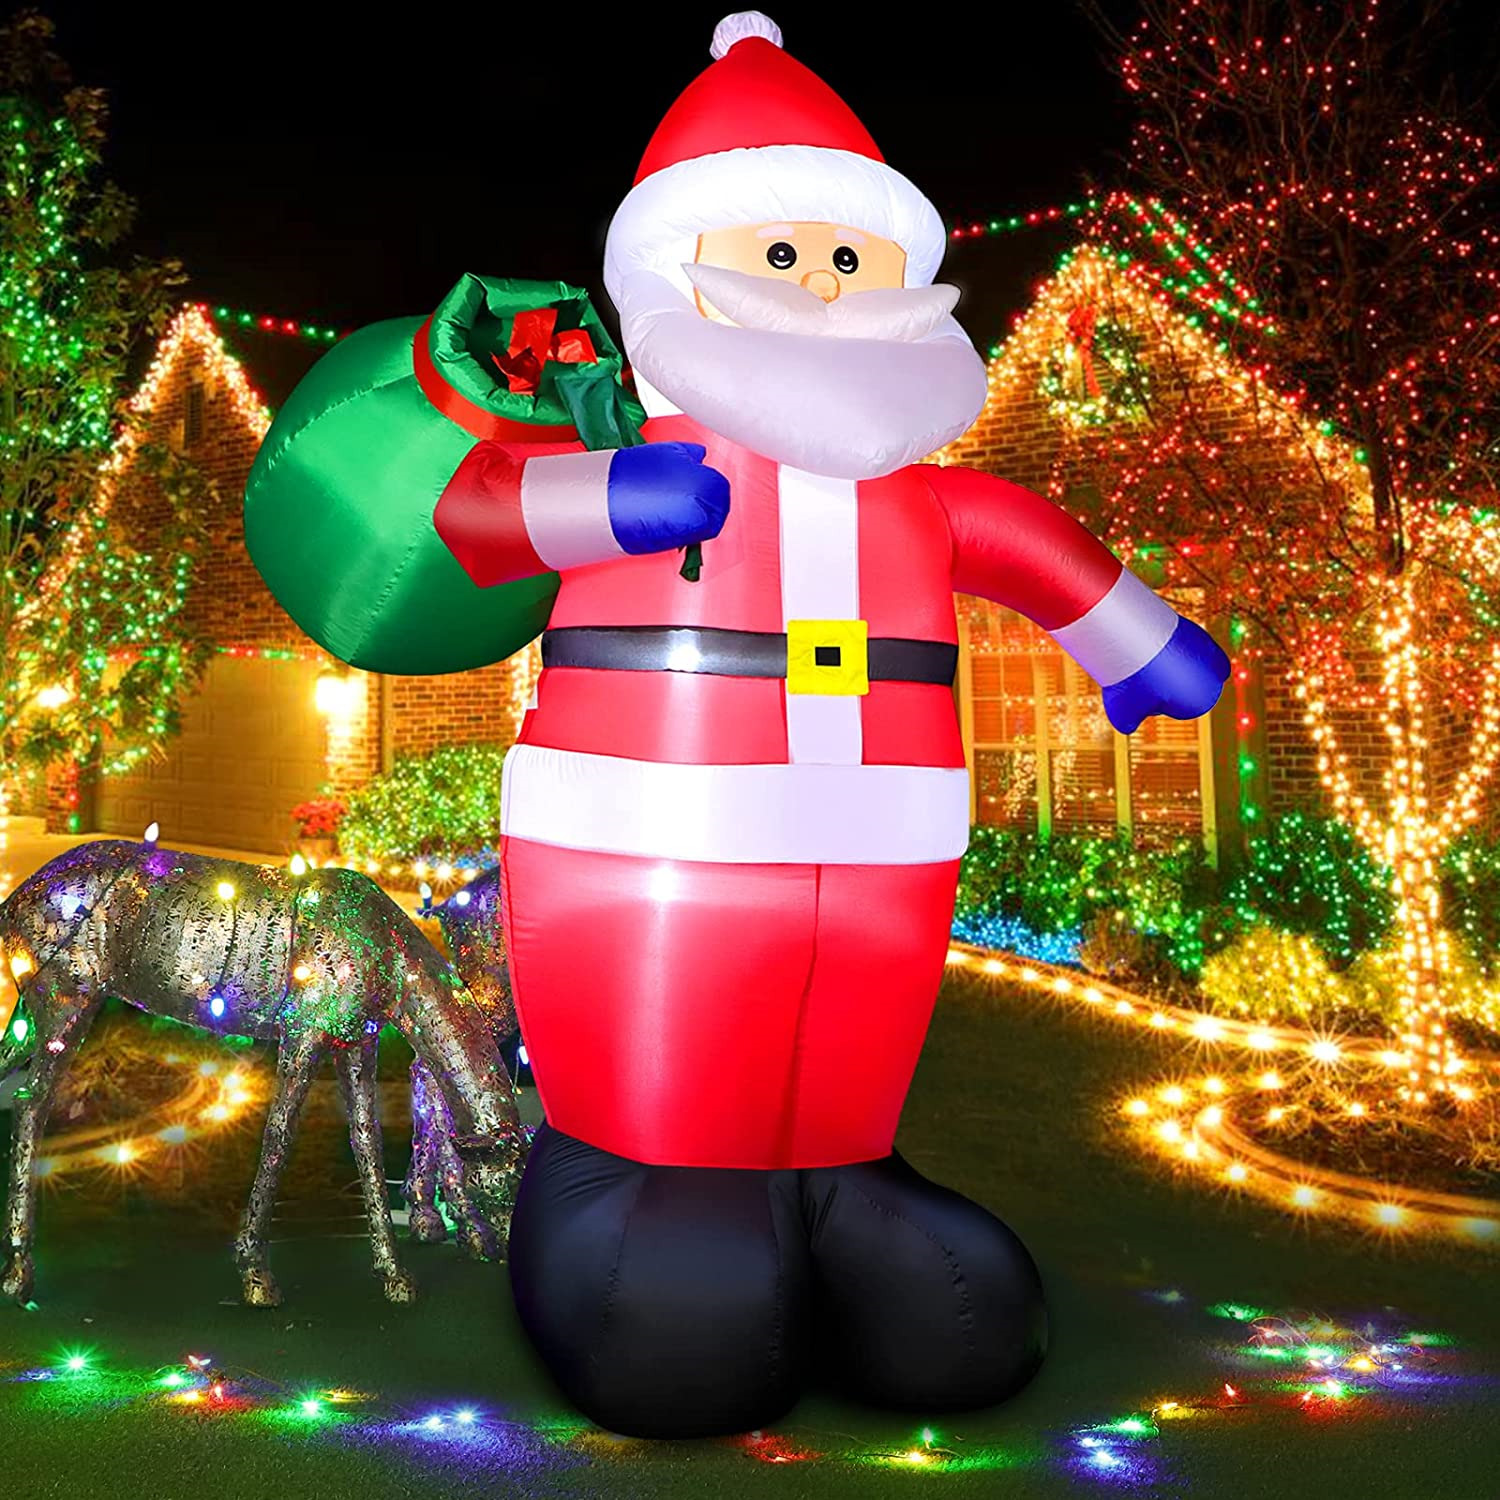 8 FT Christmas Inflatable Santa Claus Outdoor Decorations, Blow up Santa Claus